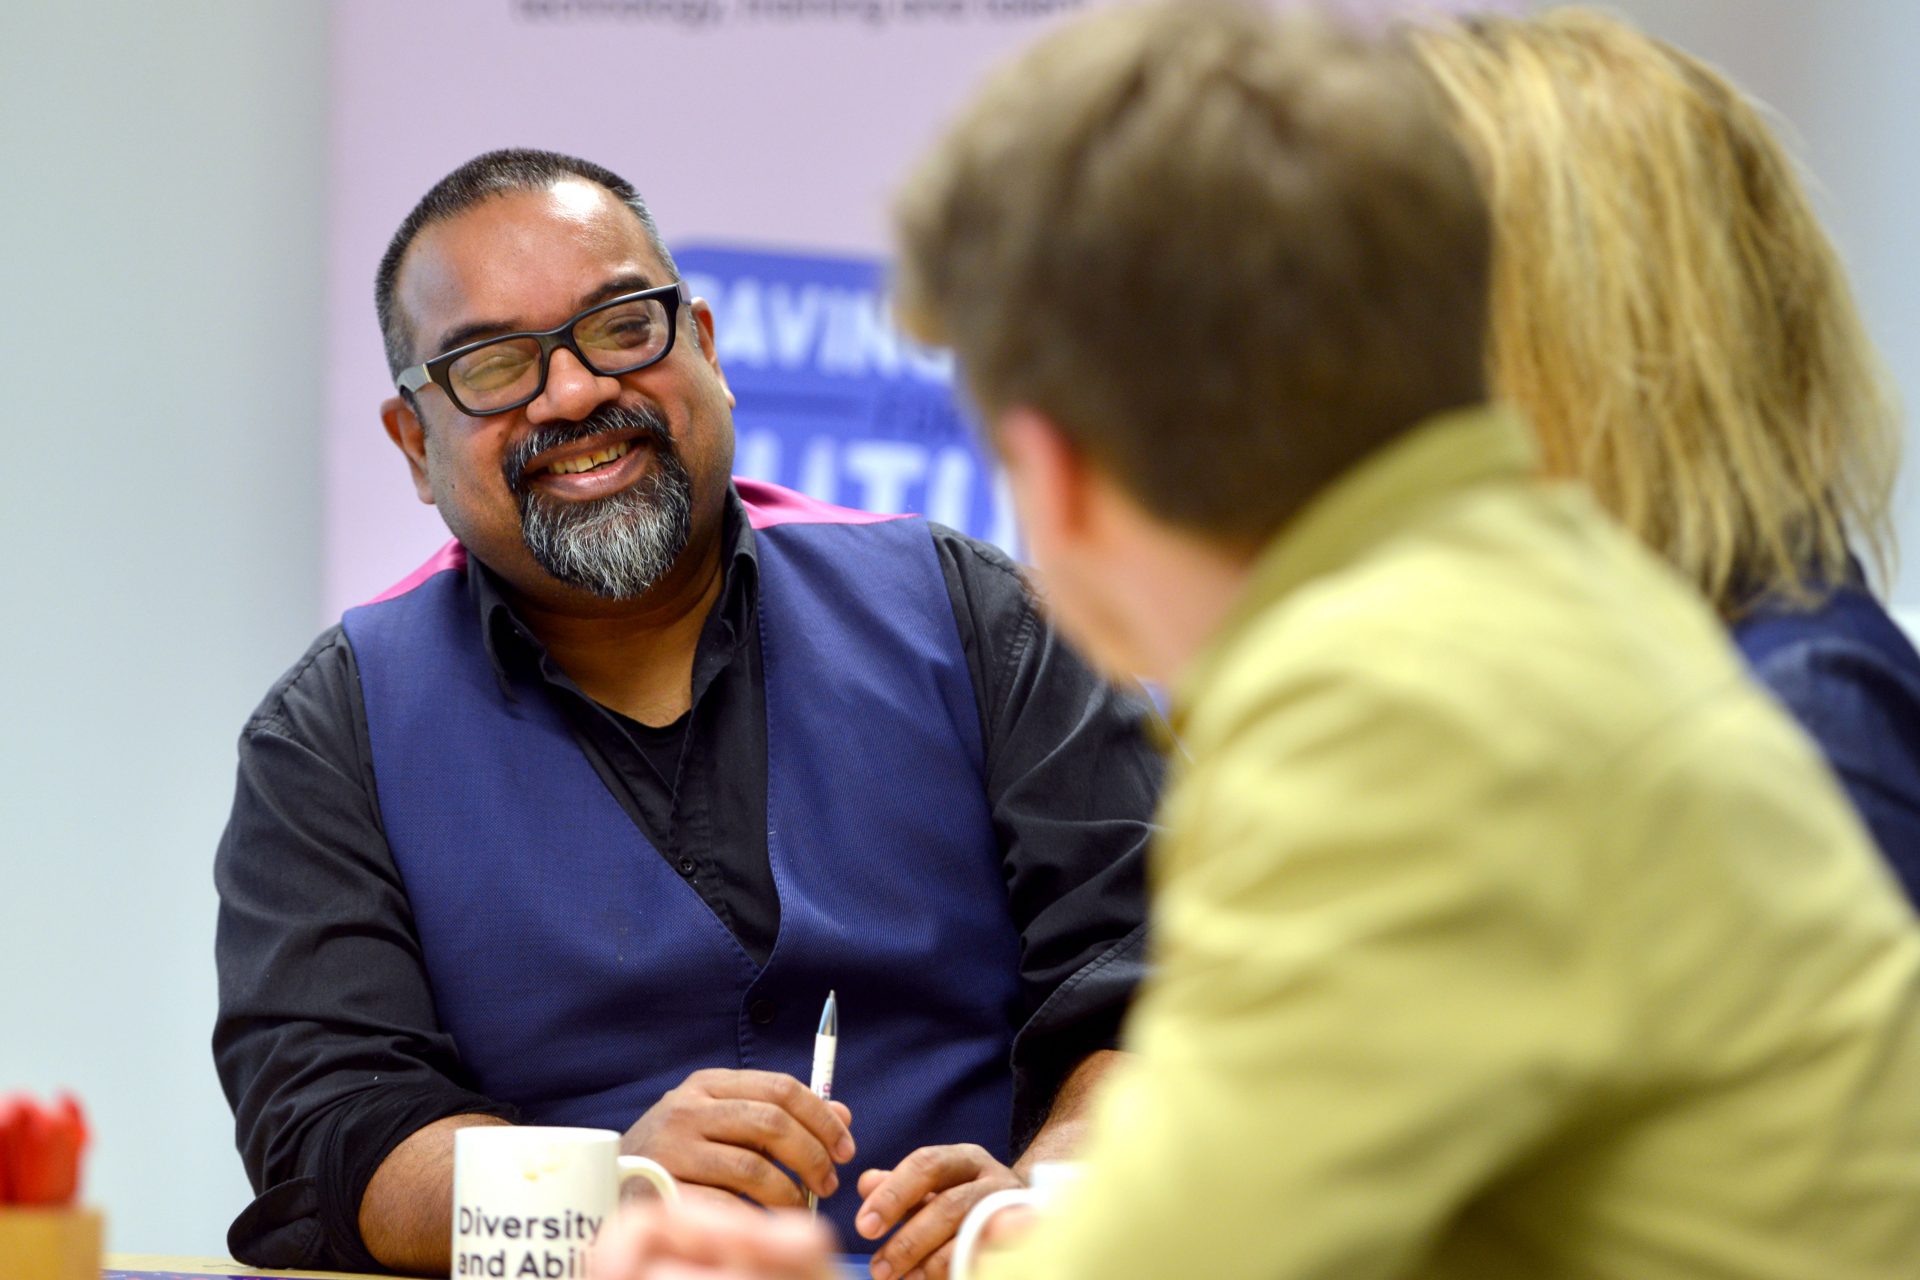 In an office, three people are sat around a table. In focus is Atif, who is smiling at two people out of focus in the foreground.